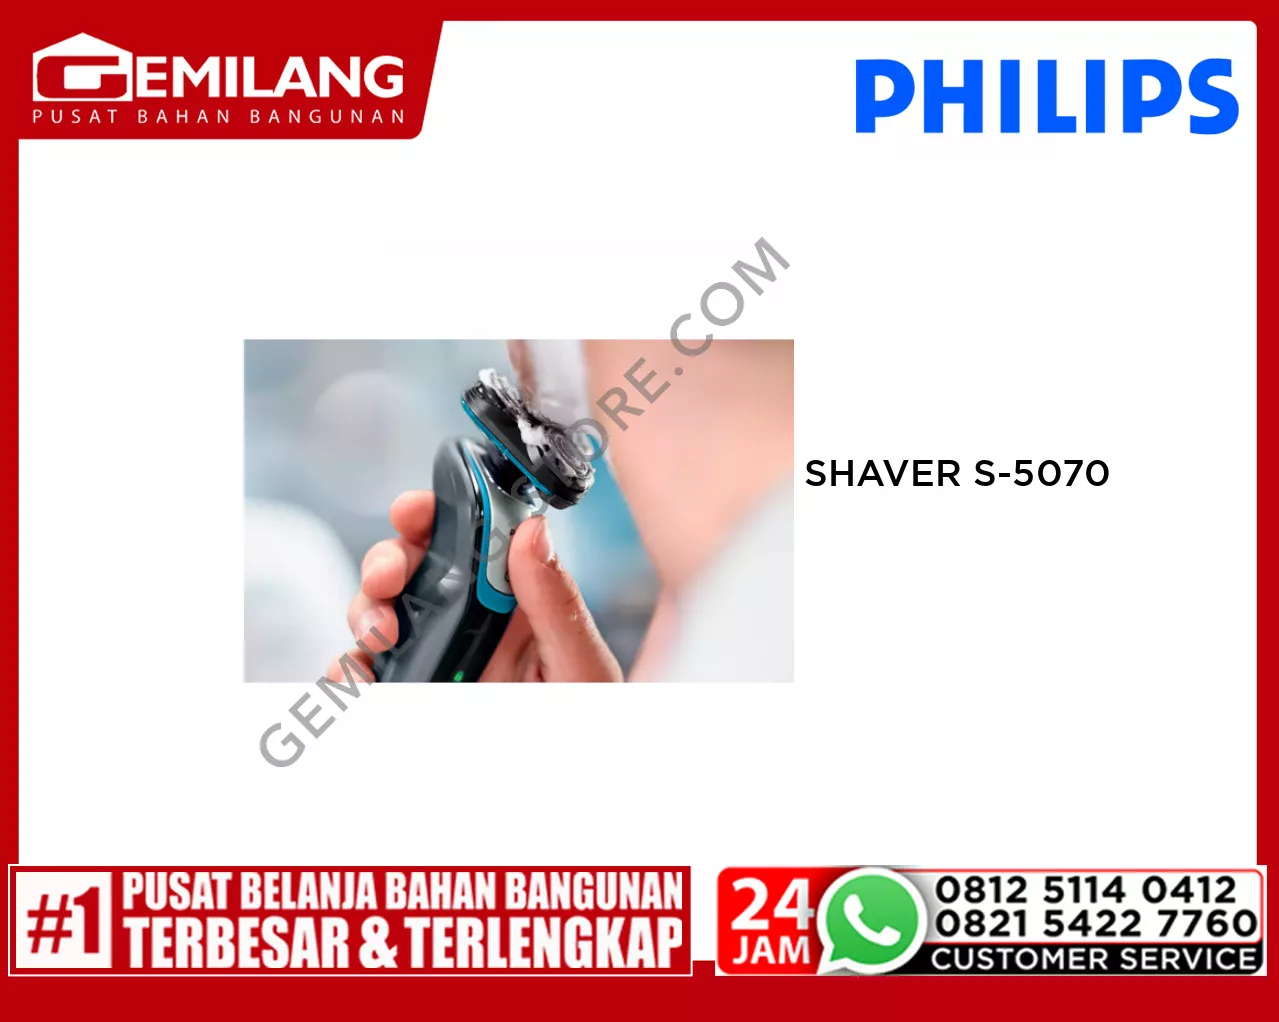 PHILIPS SHAVER S-5070